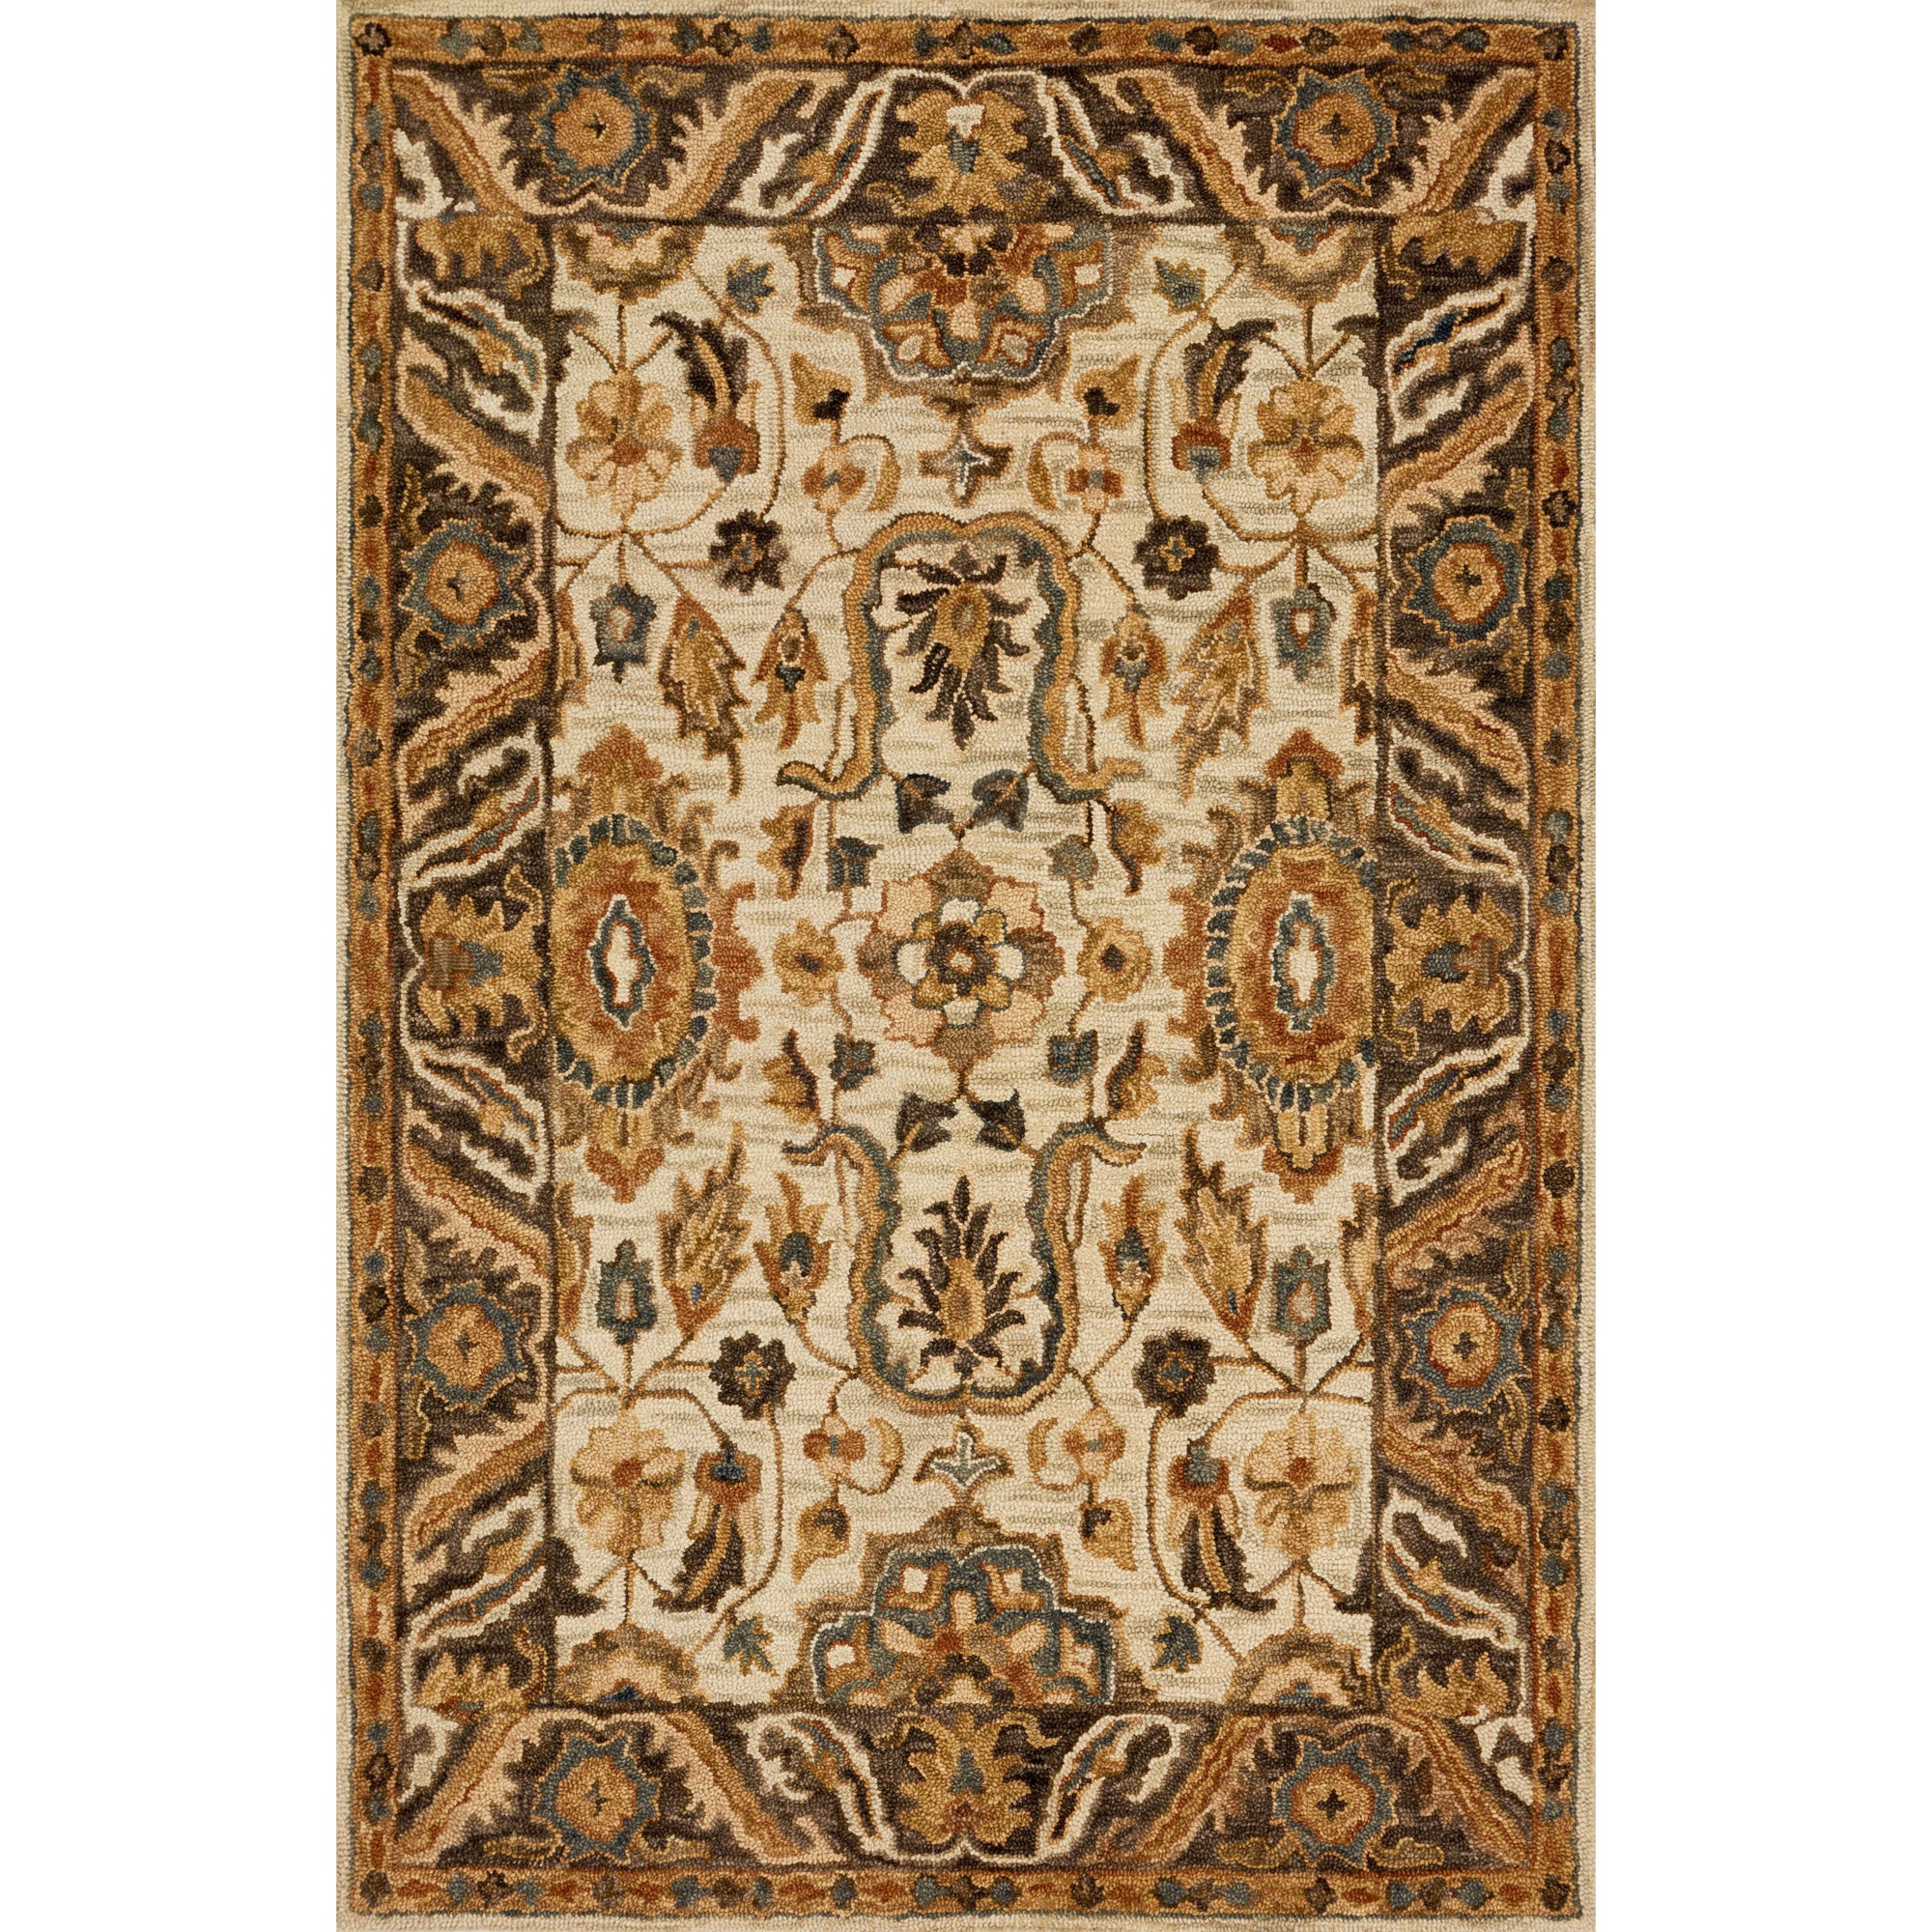 Rugs by Roo Loloi Victoria Ivory Dk Taupe Area Rug in size 18" x 18" Sample